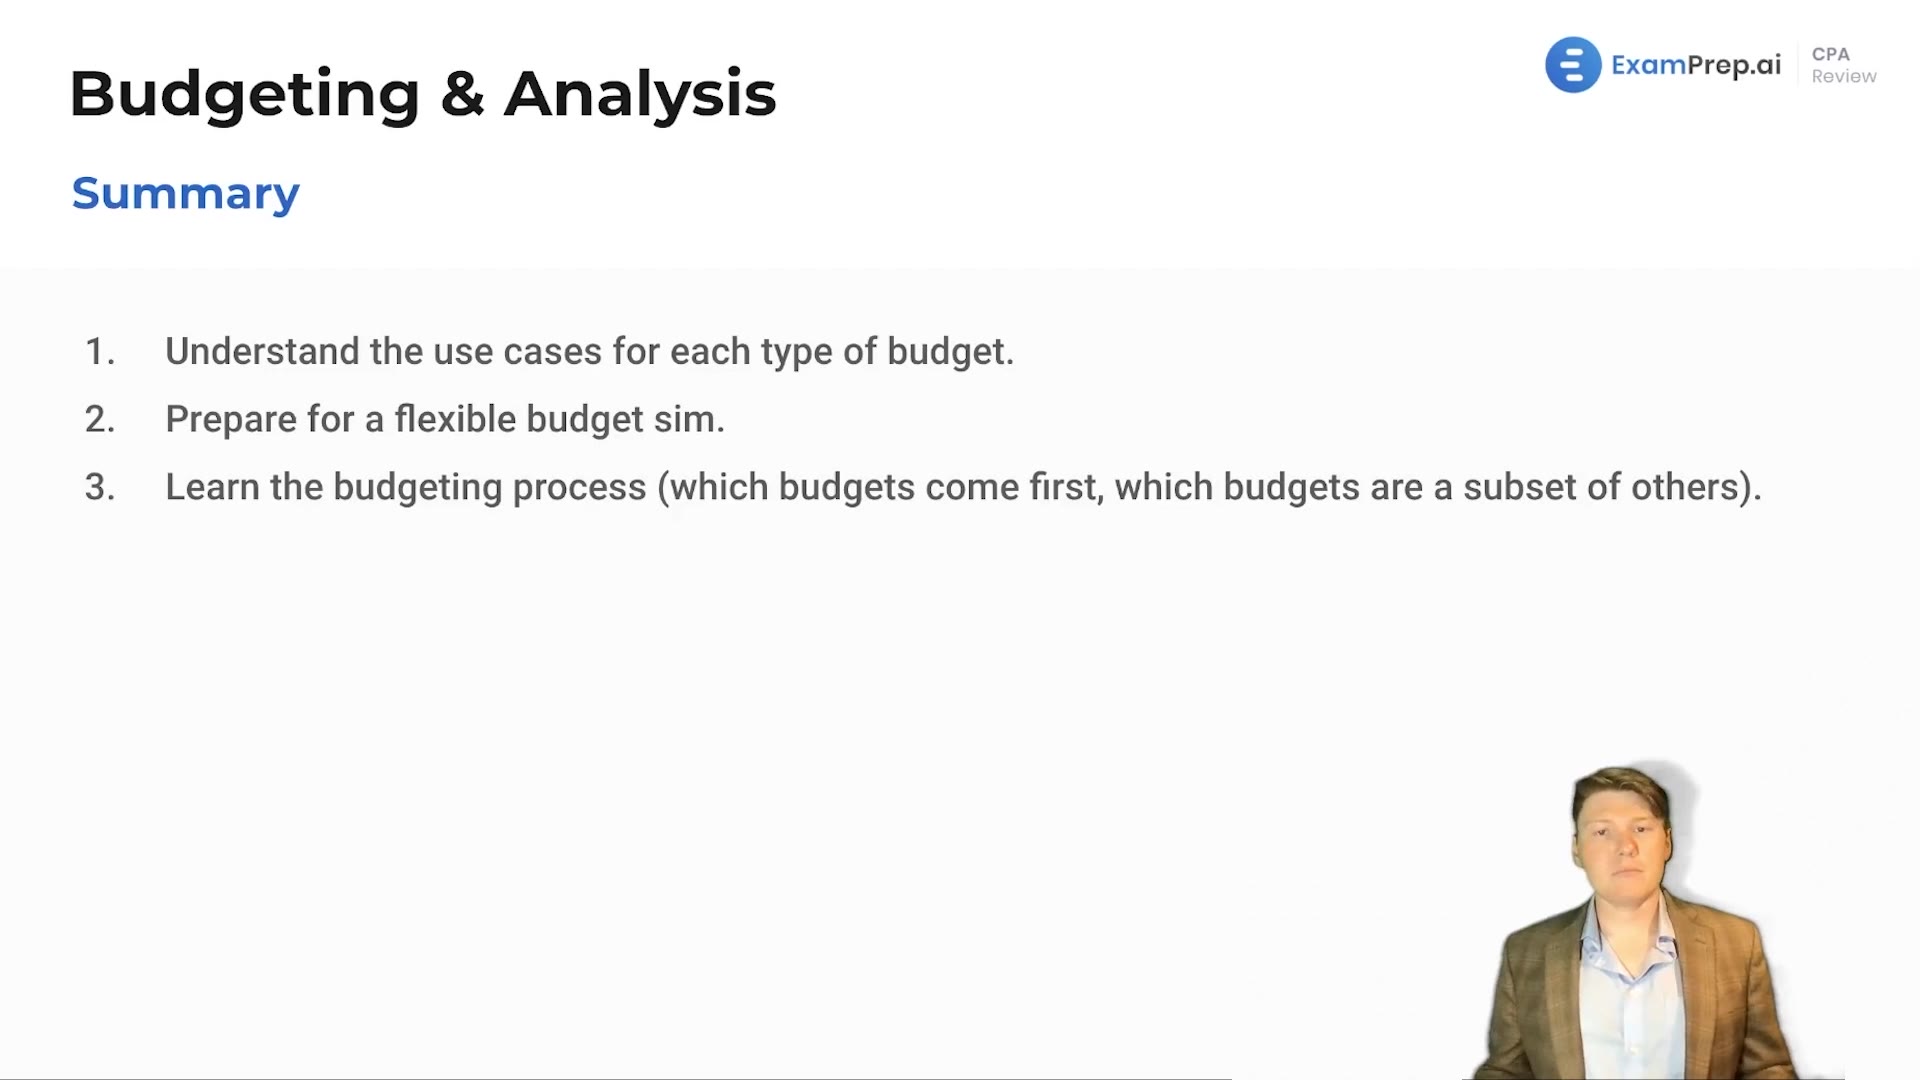 Budgeting and Analysis Summary lesson thumbnail